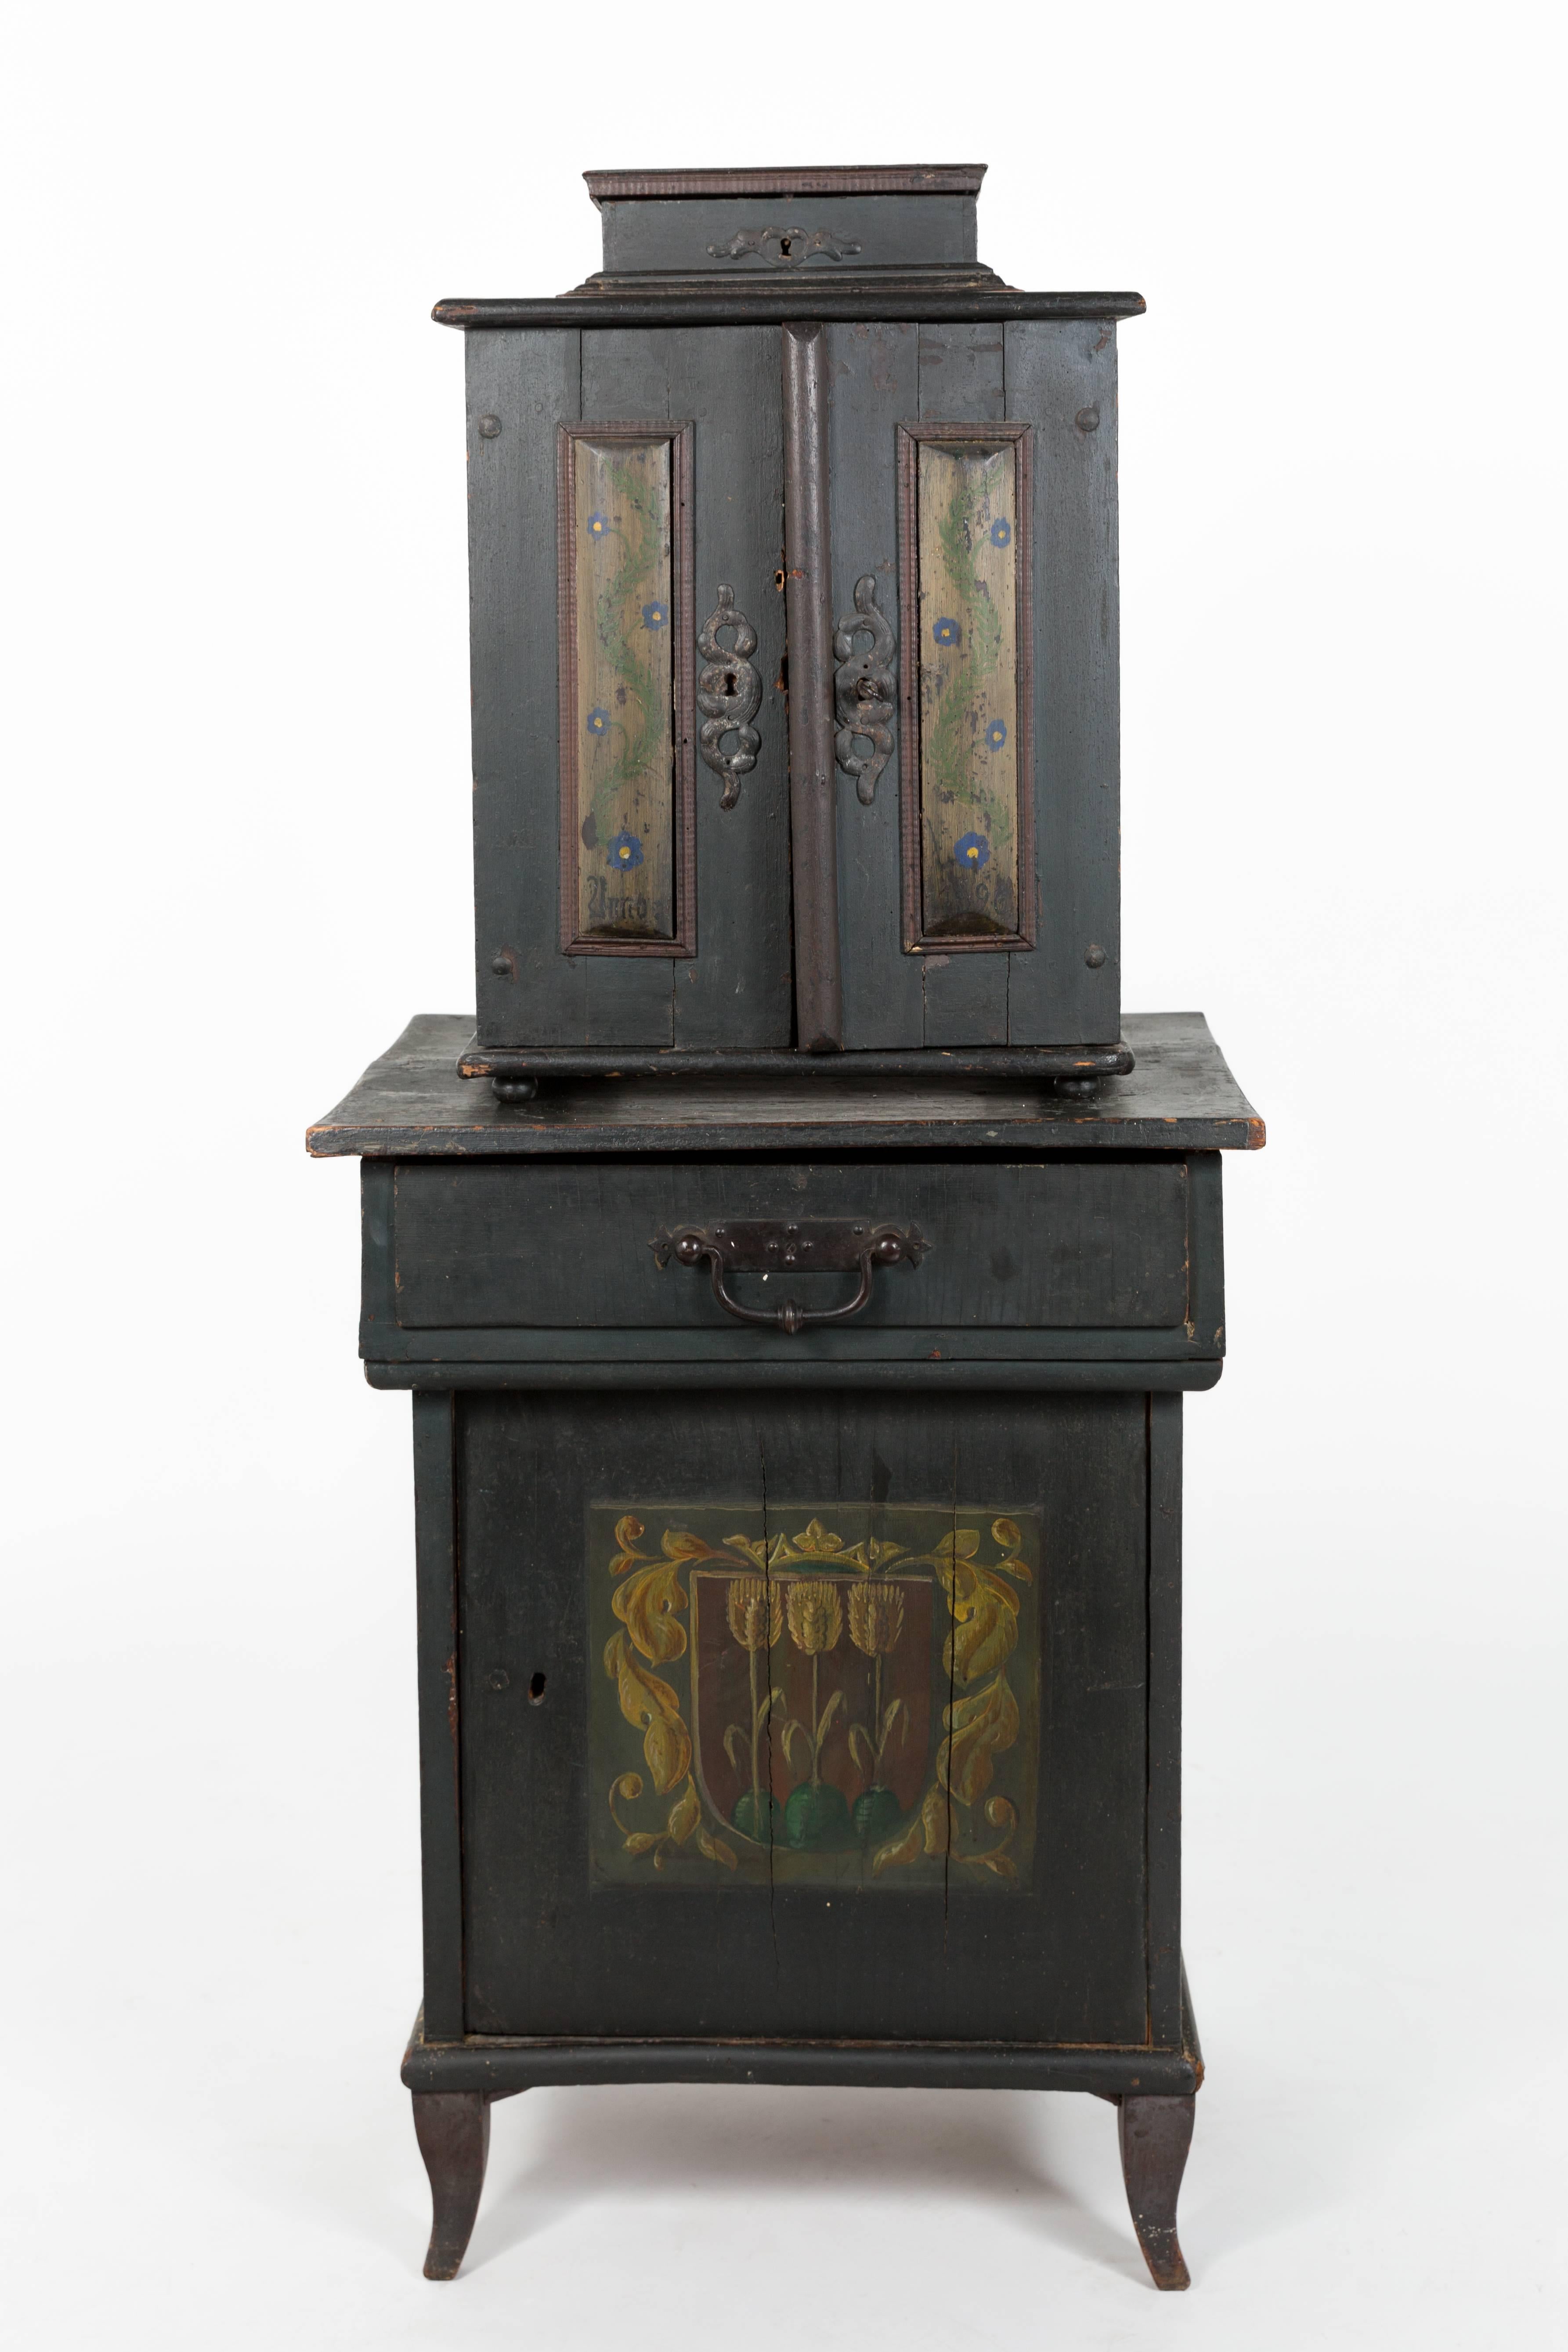 A late 19th century Austrian hand-painted country cabinet with drawers. It has 19 small drawers and one large.